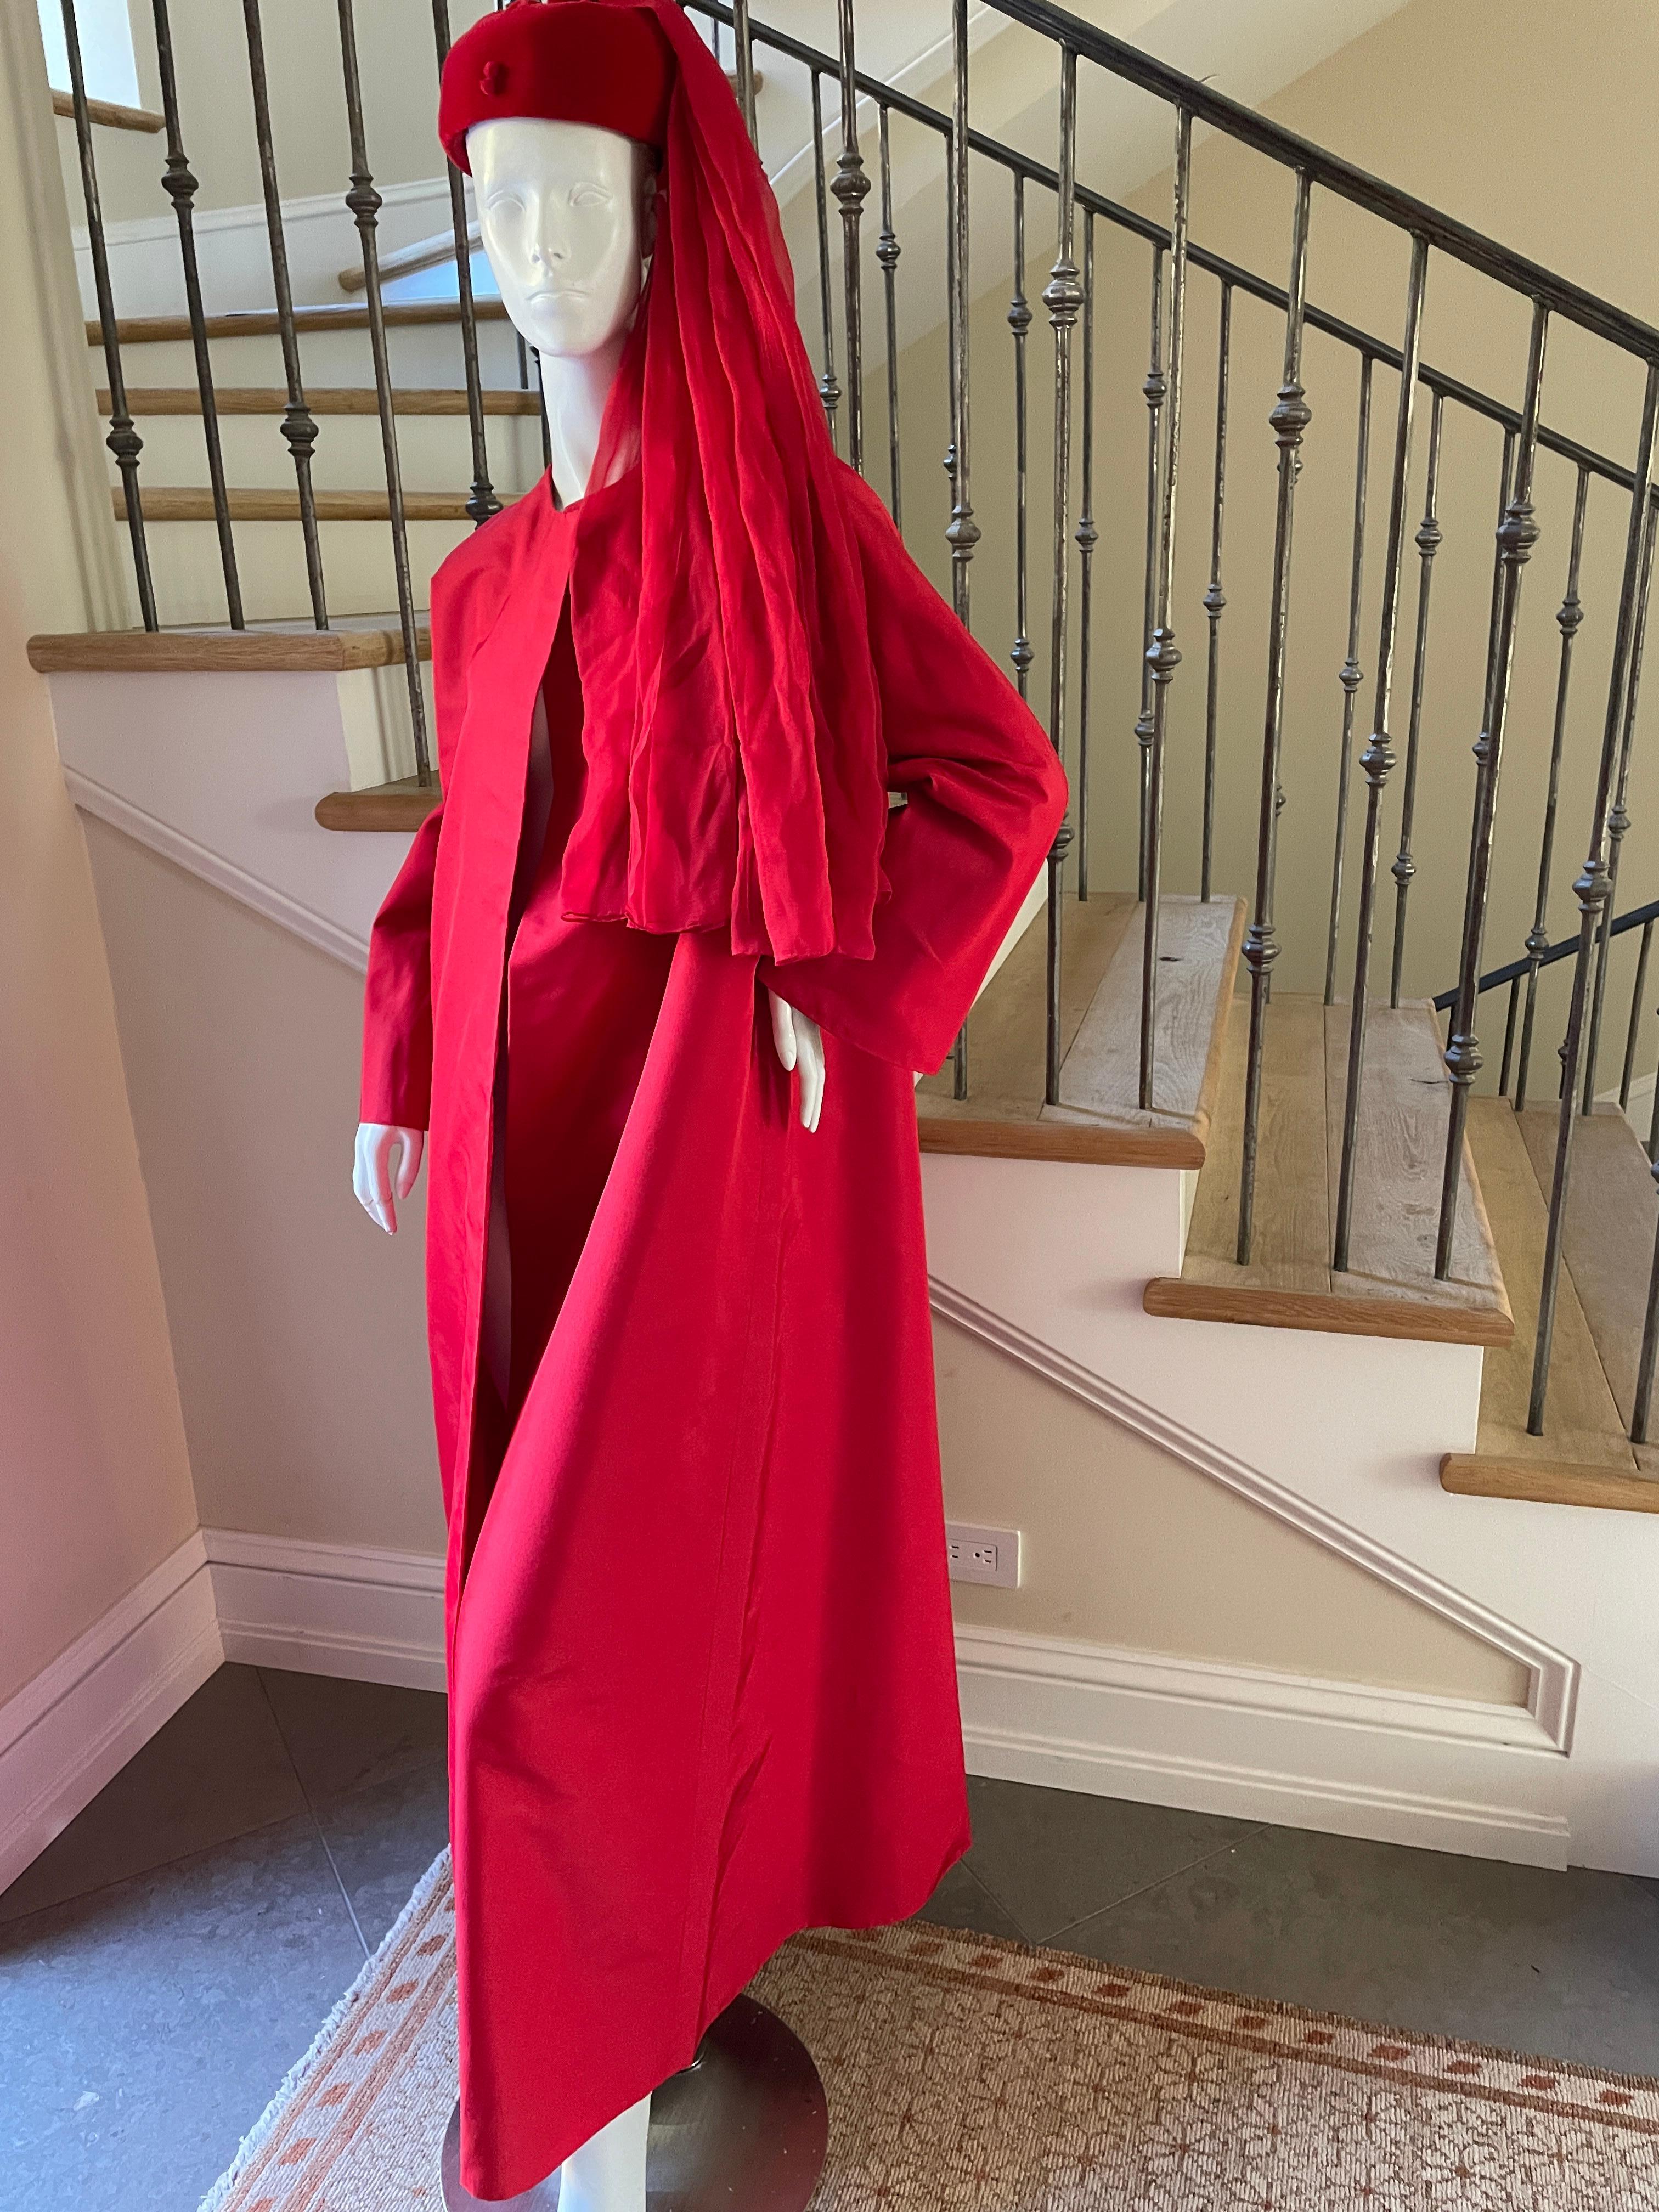 Jean-Louis Couture 1960's Red Silk Opera Coat with Matching Hat.
Bust 49